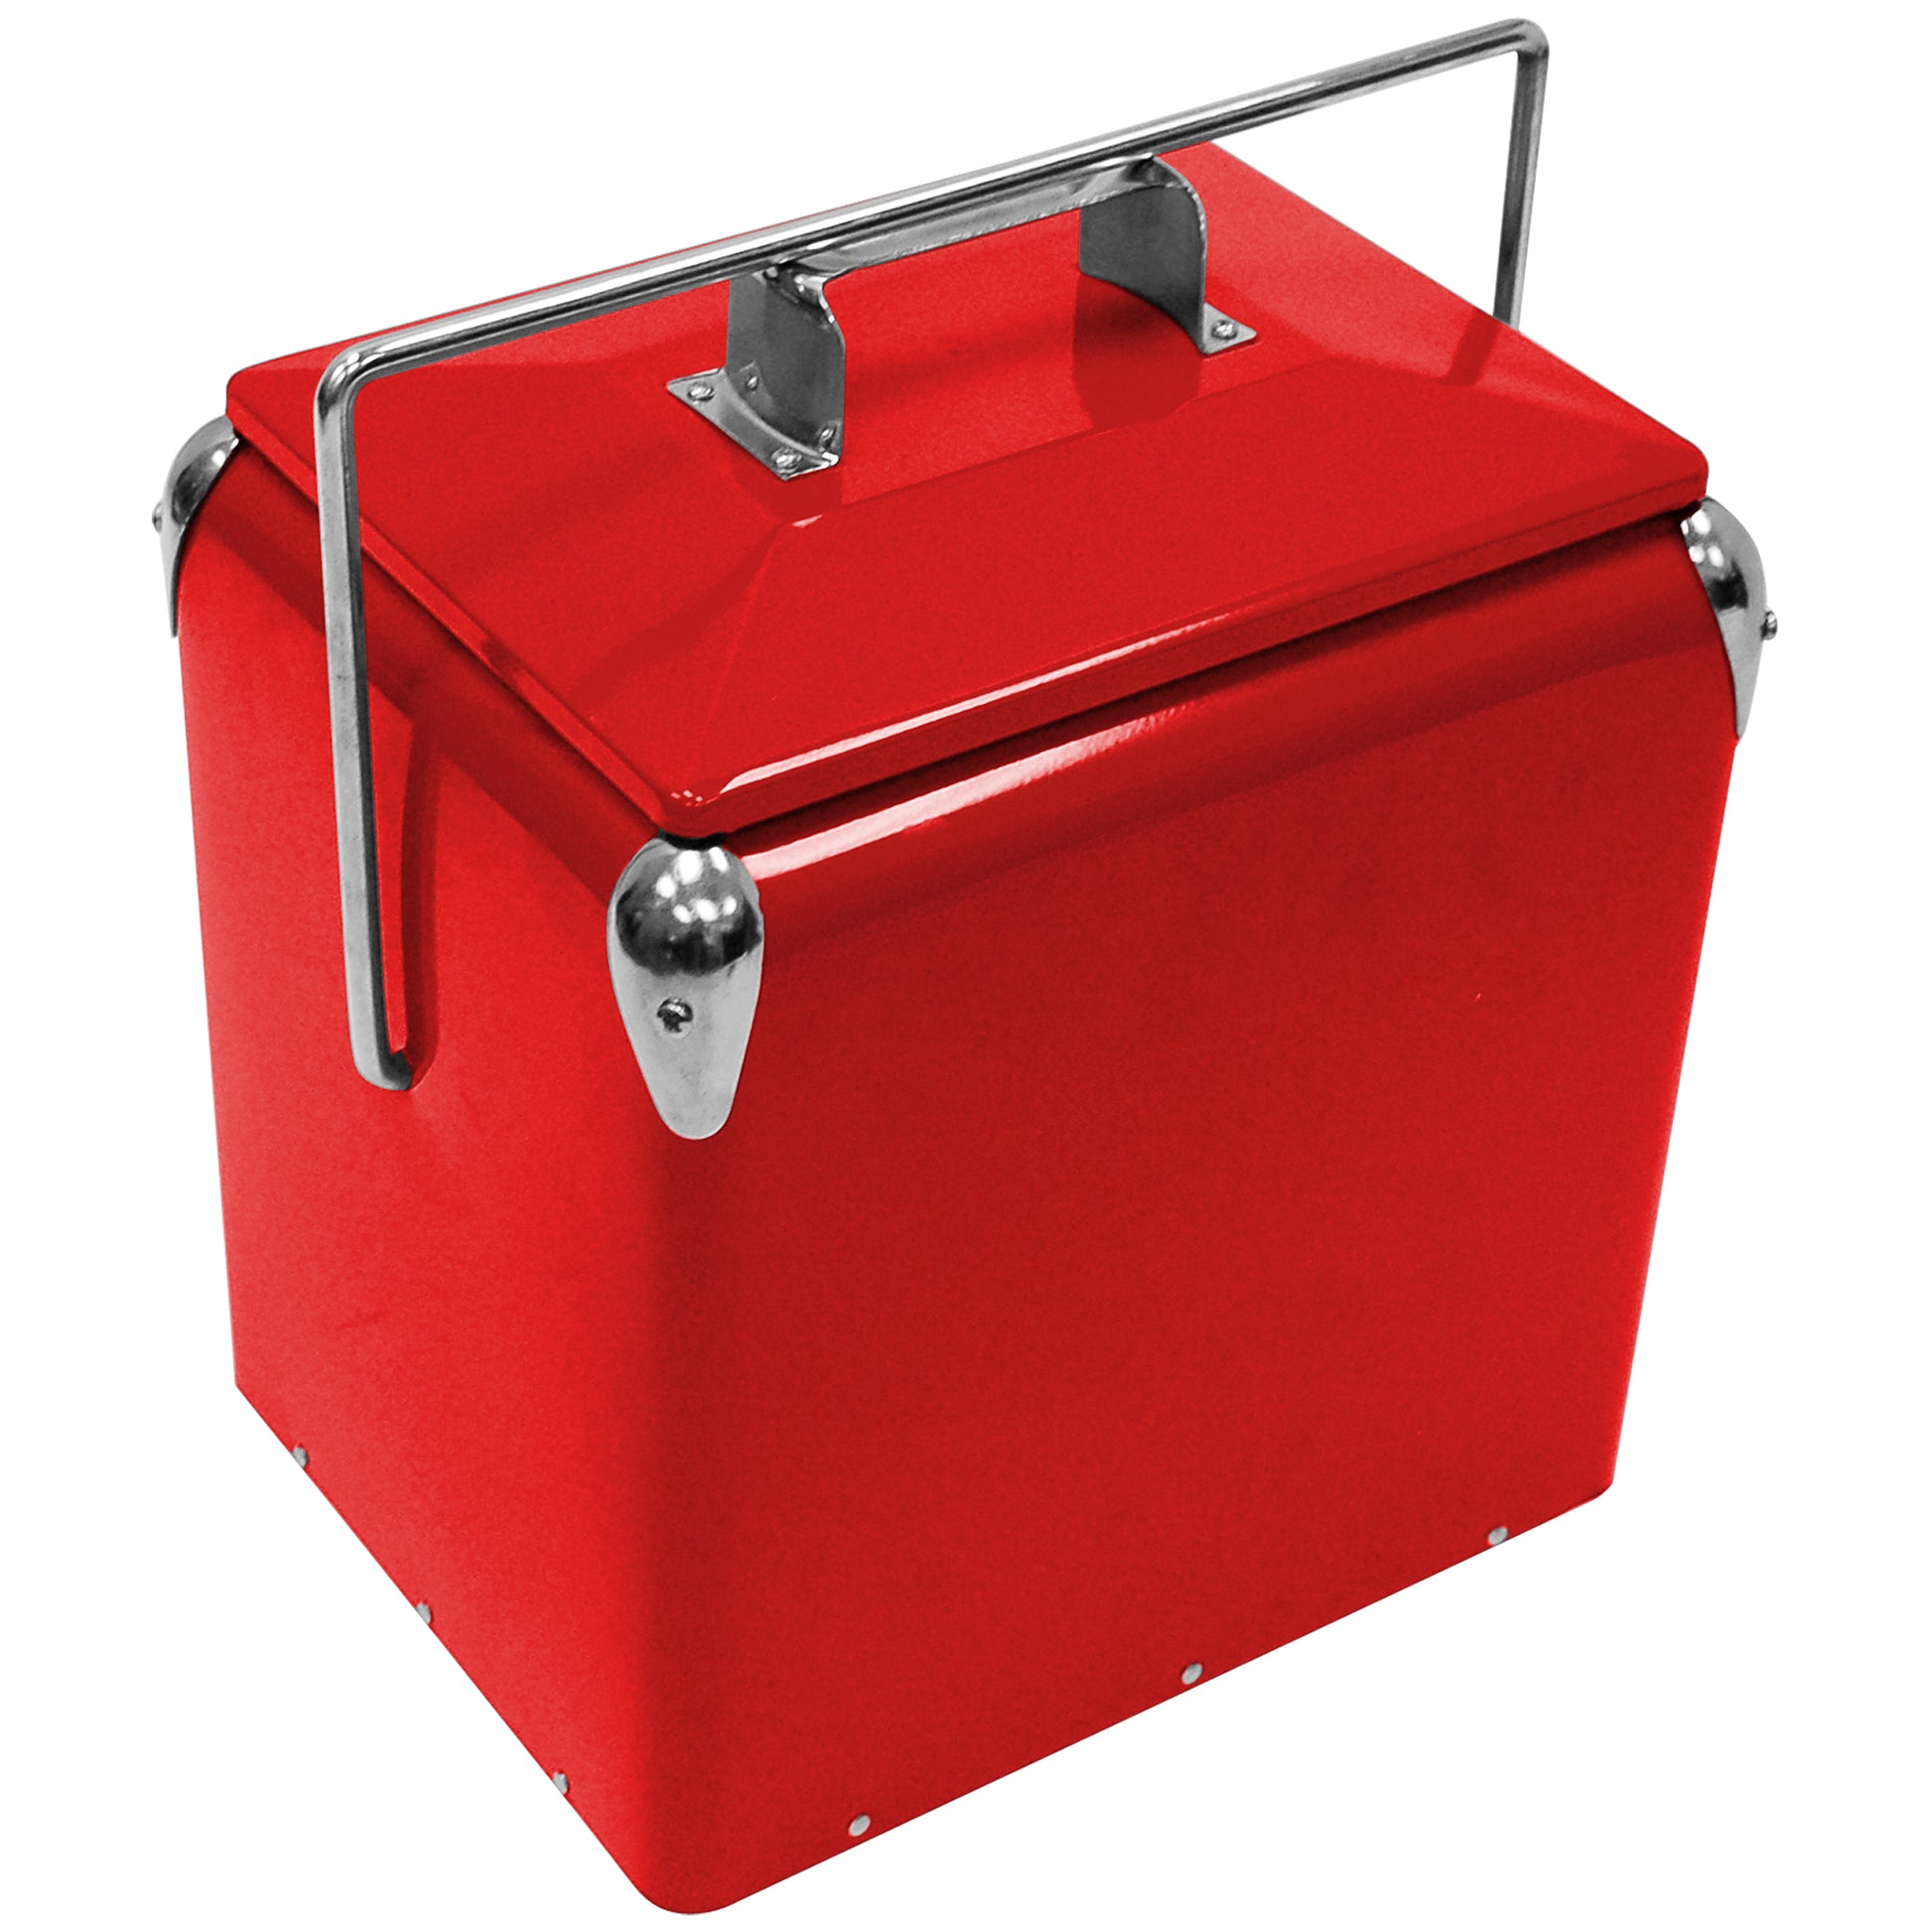 retro-legacy-cooler-in-red